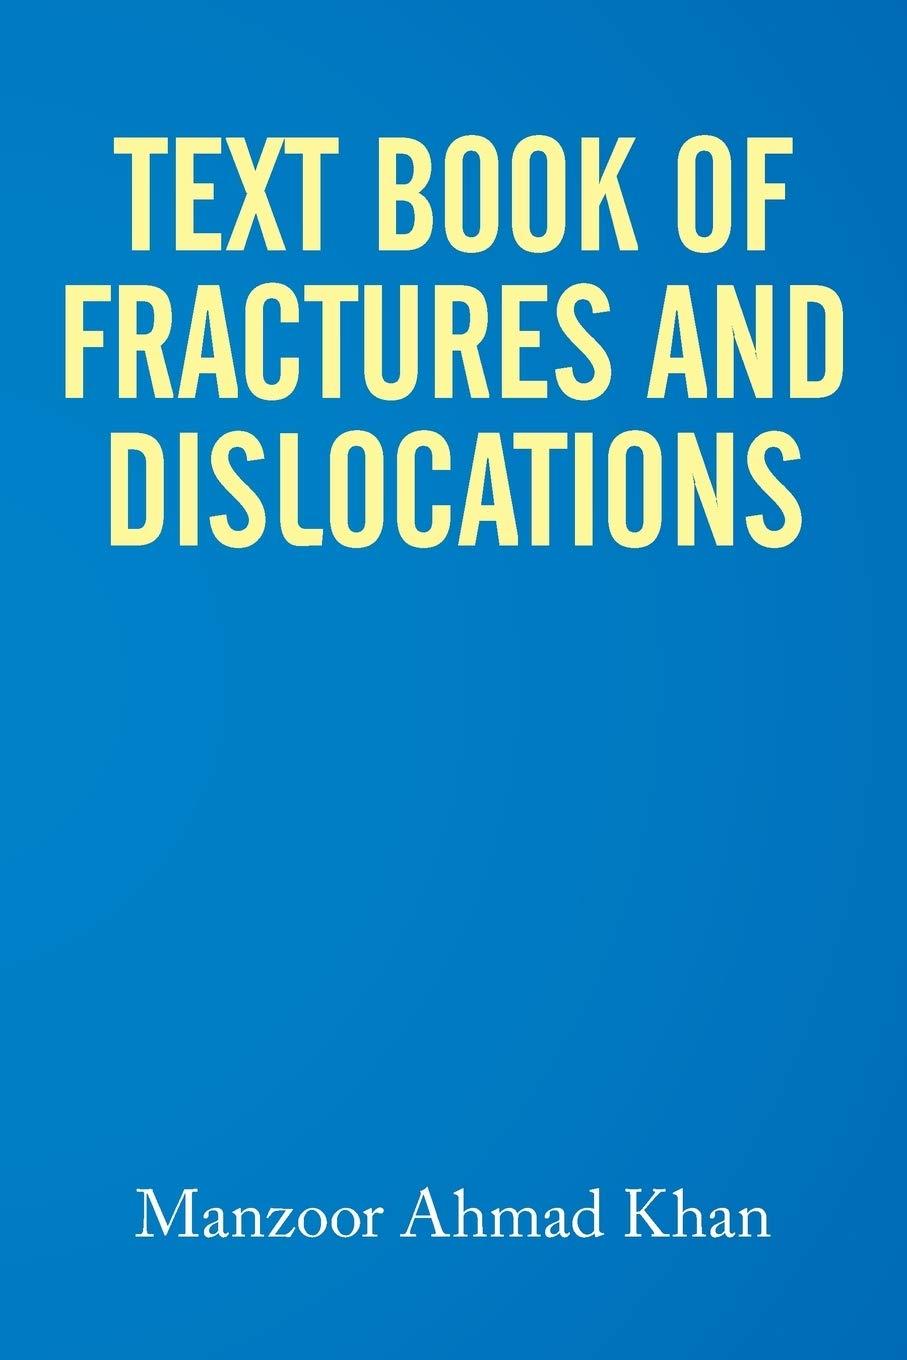 Textbook of Fractures and Dislocations: Khan, Manzoor Ahmad: 9781514440650:  Amazon.com: Books